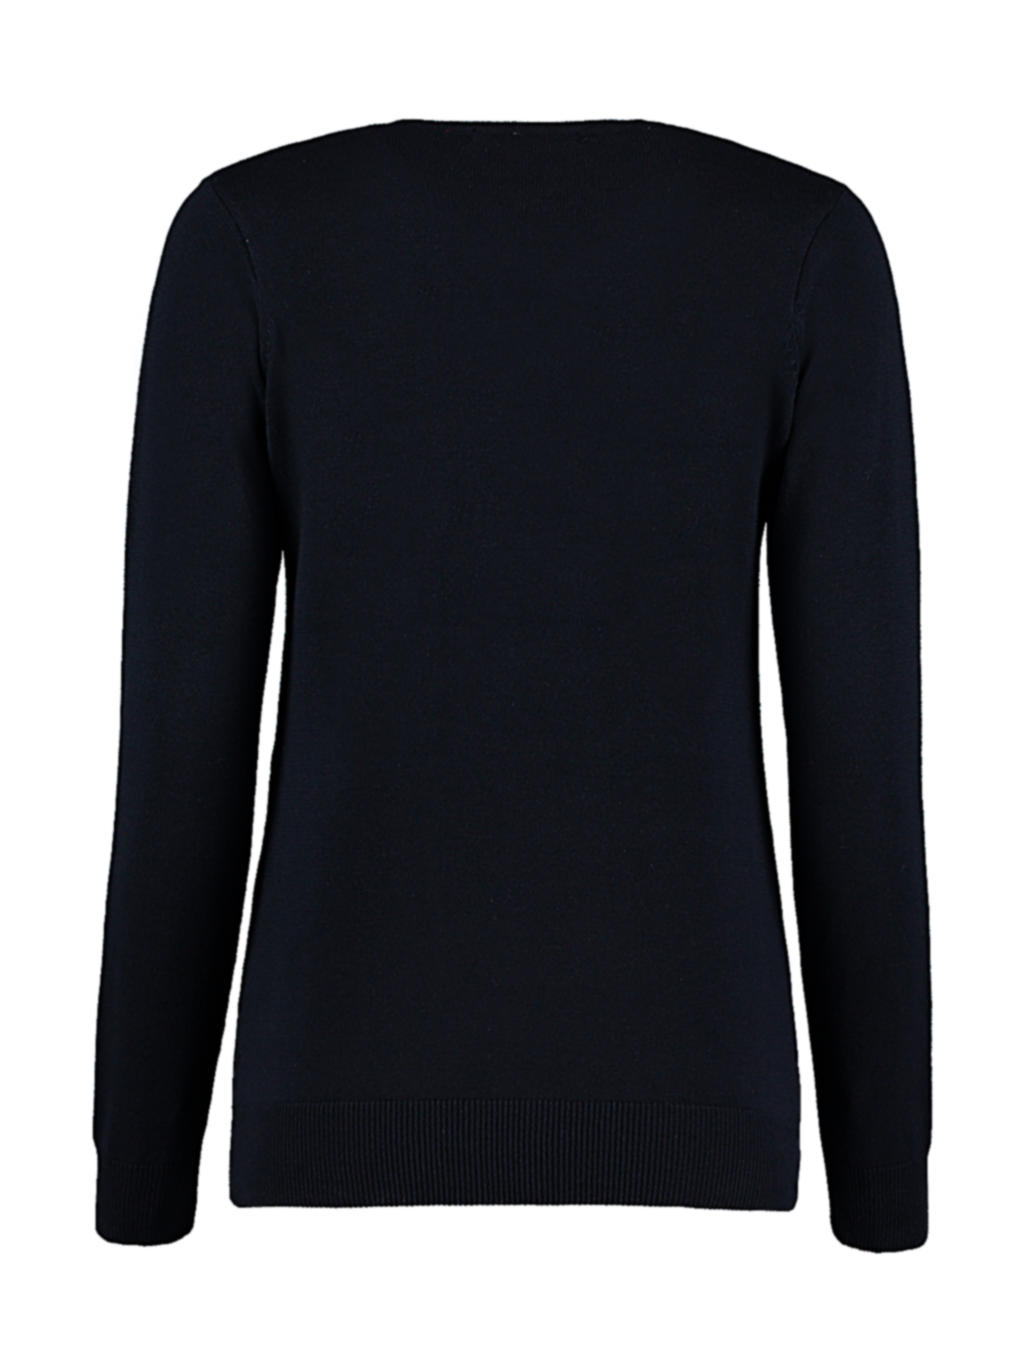  Womens Classic Fit Arundel Sweater in Farbe Black